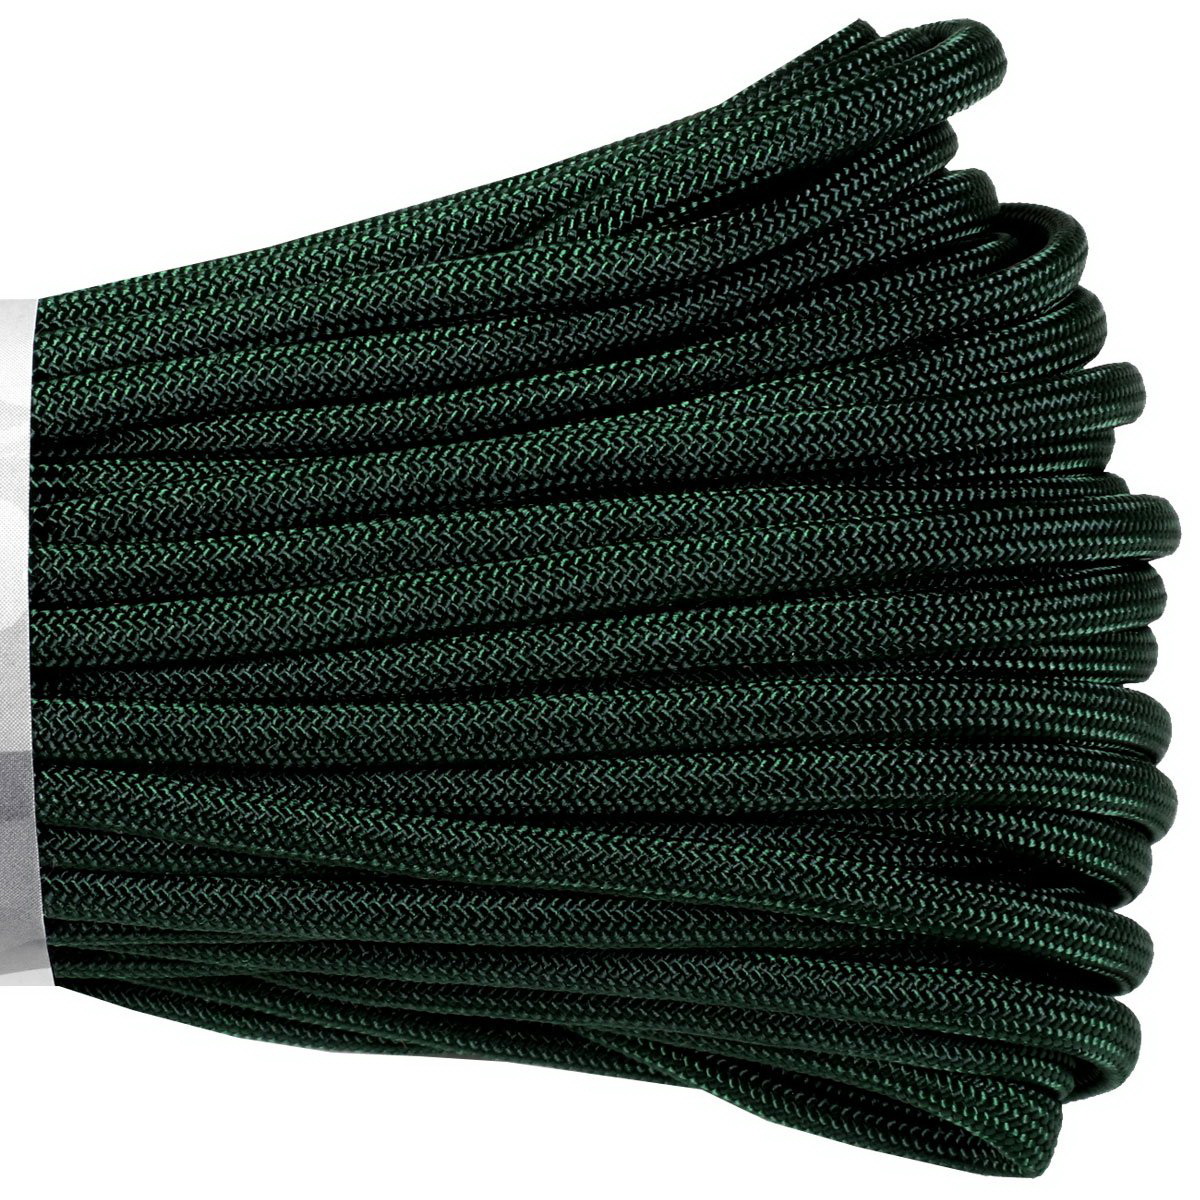 Atwood Rope Mfg SS15 Paracord, 5/32 in Dia, 100 ft L, Hunter - 2